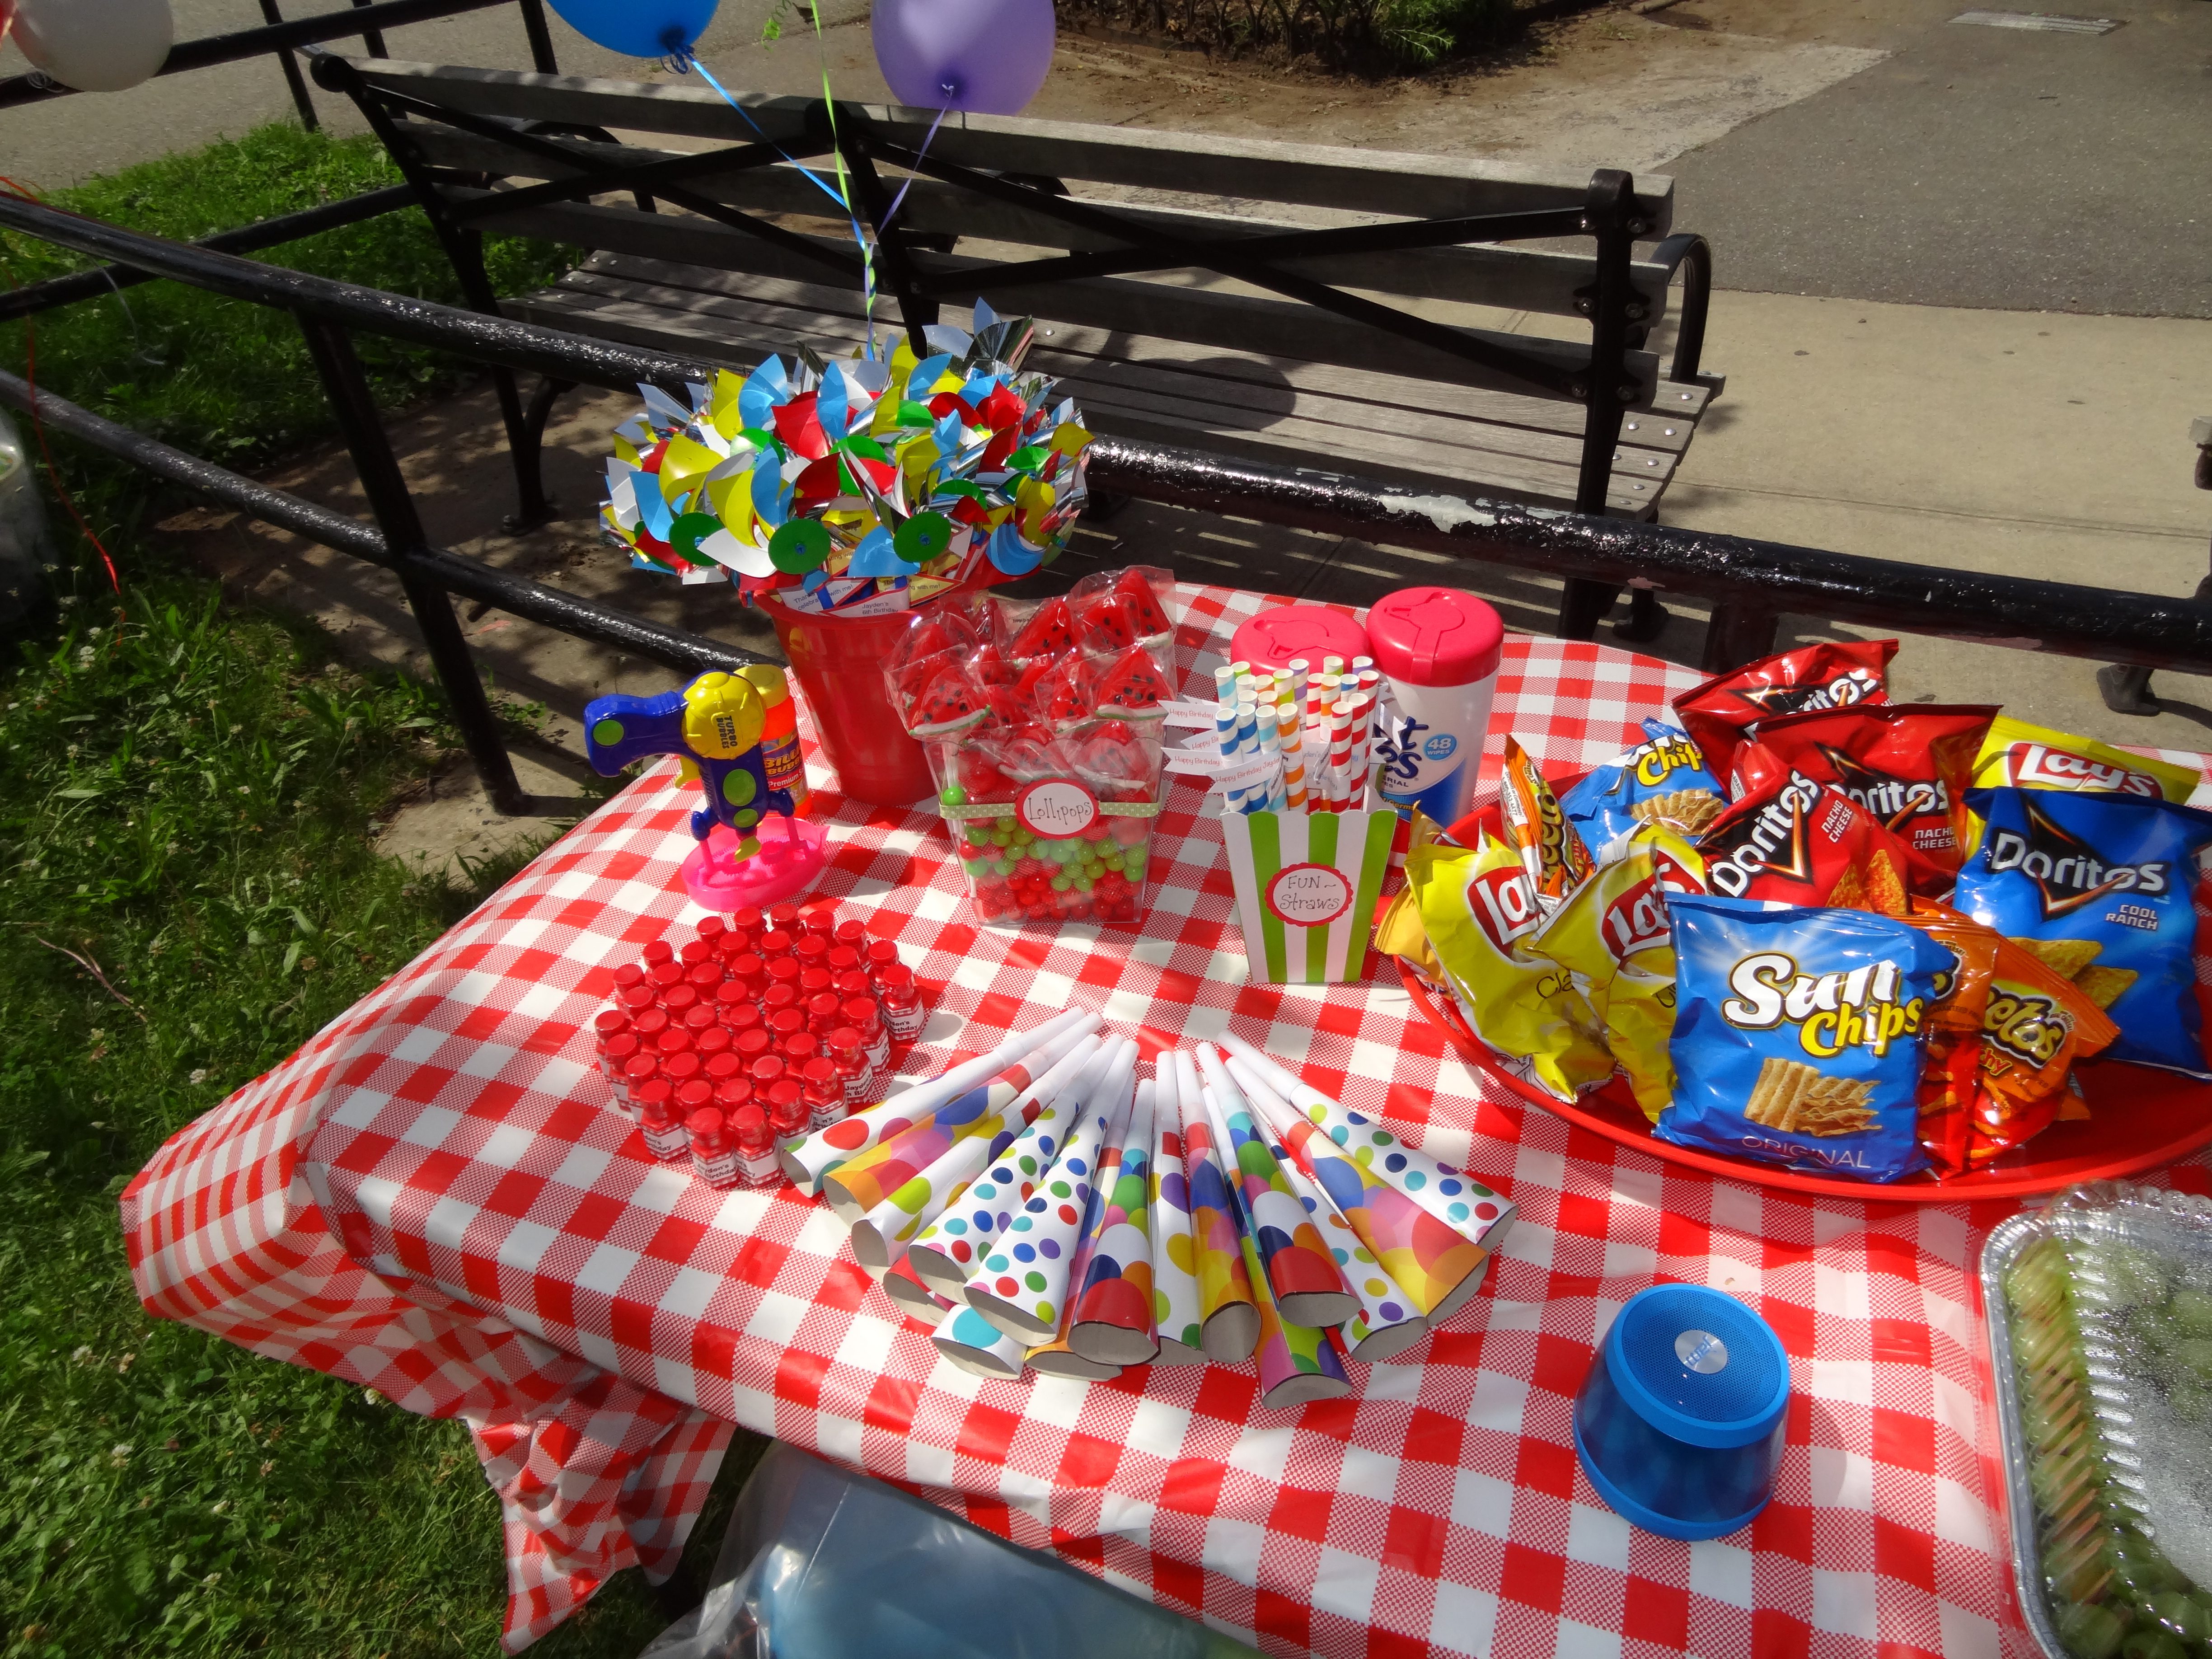 A Picnic Birthday Party makes a great summer celebration - Check out my 5 tips for planning the perfect summer birthday party - Click the link https://www.nyctechmommy.com/planning-the-perfect-summer-birthday-party/